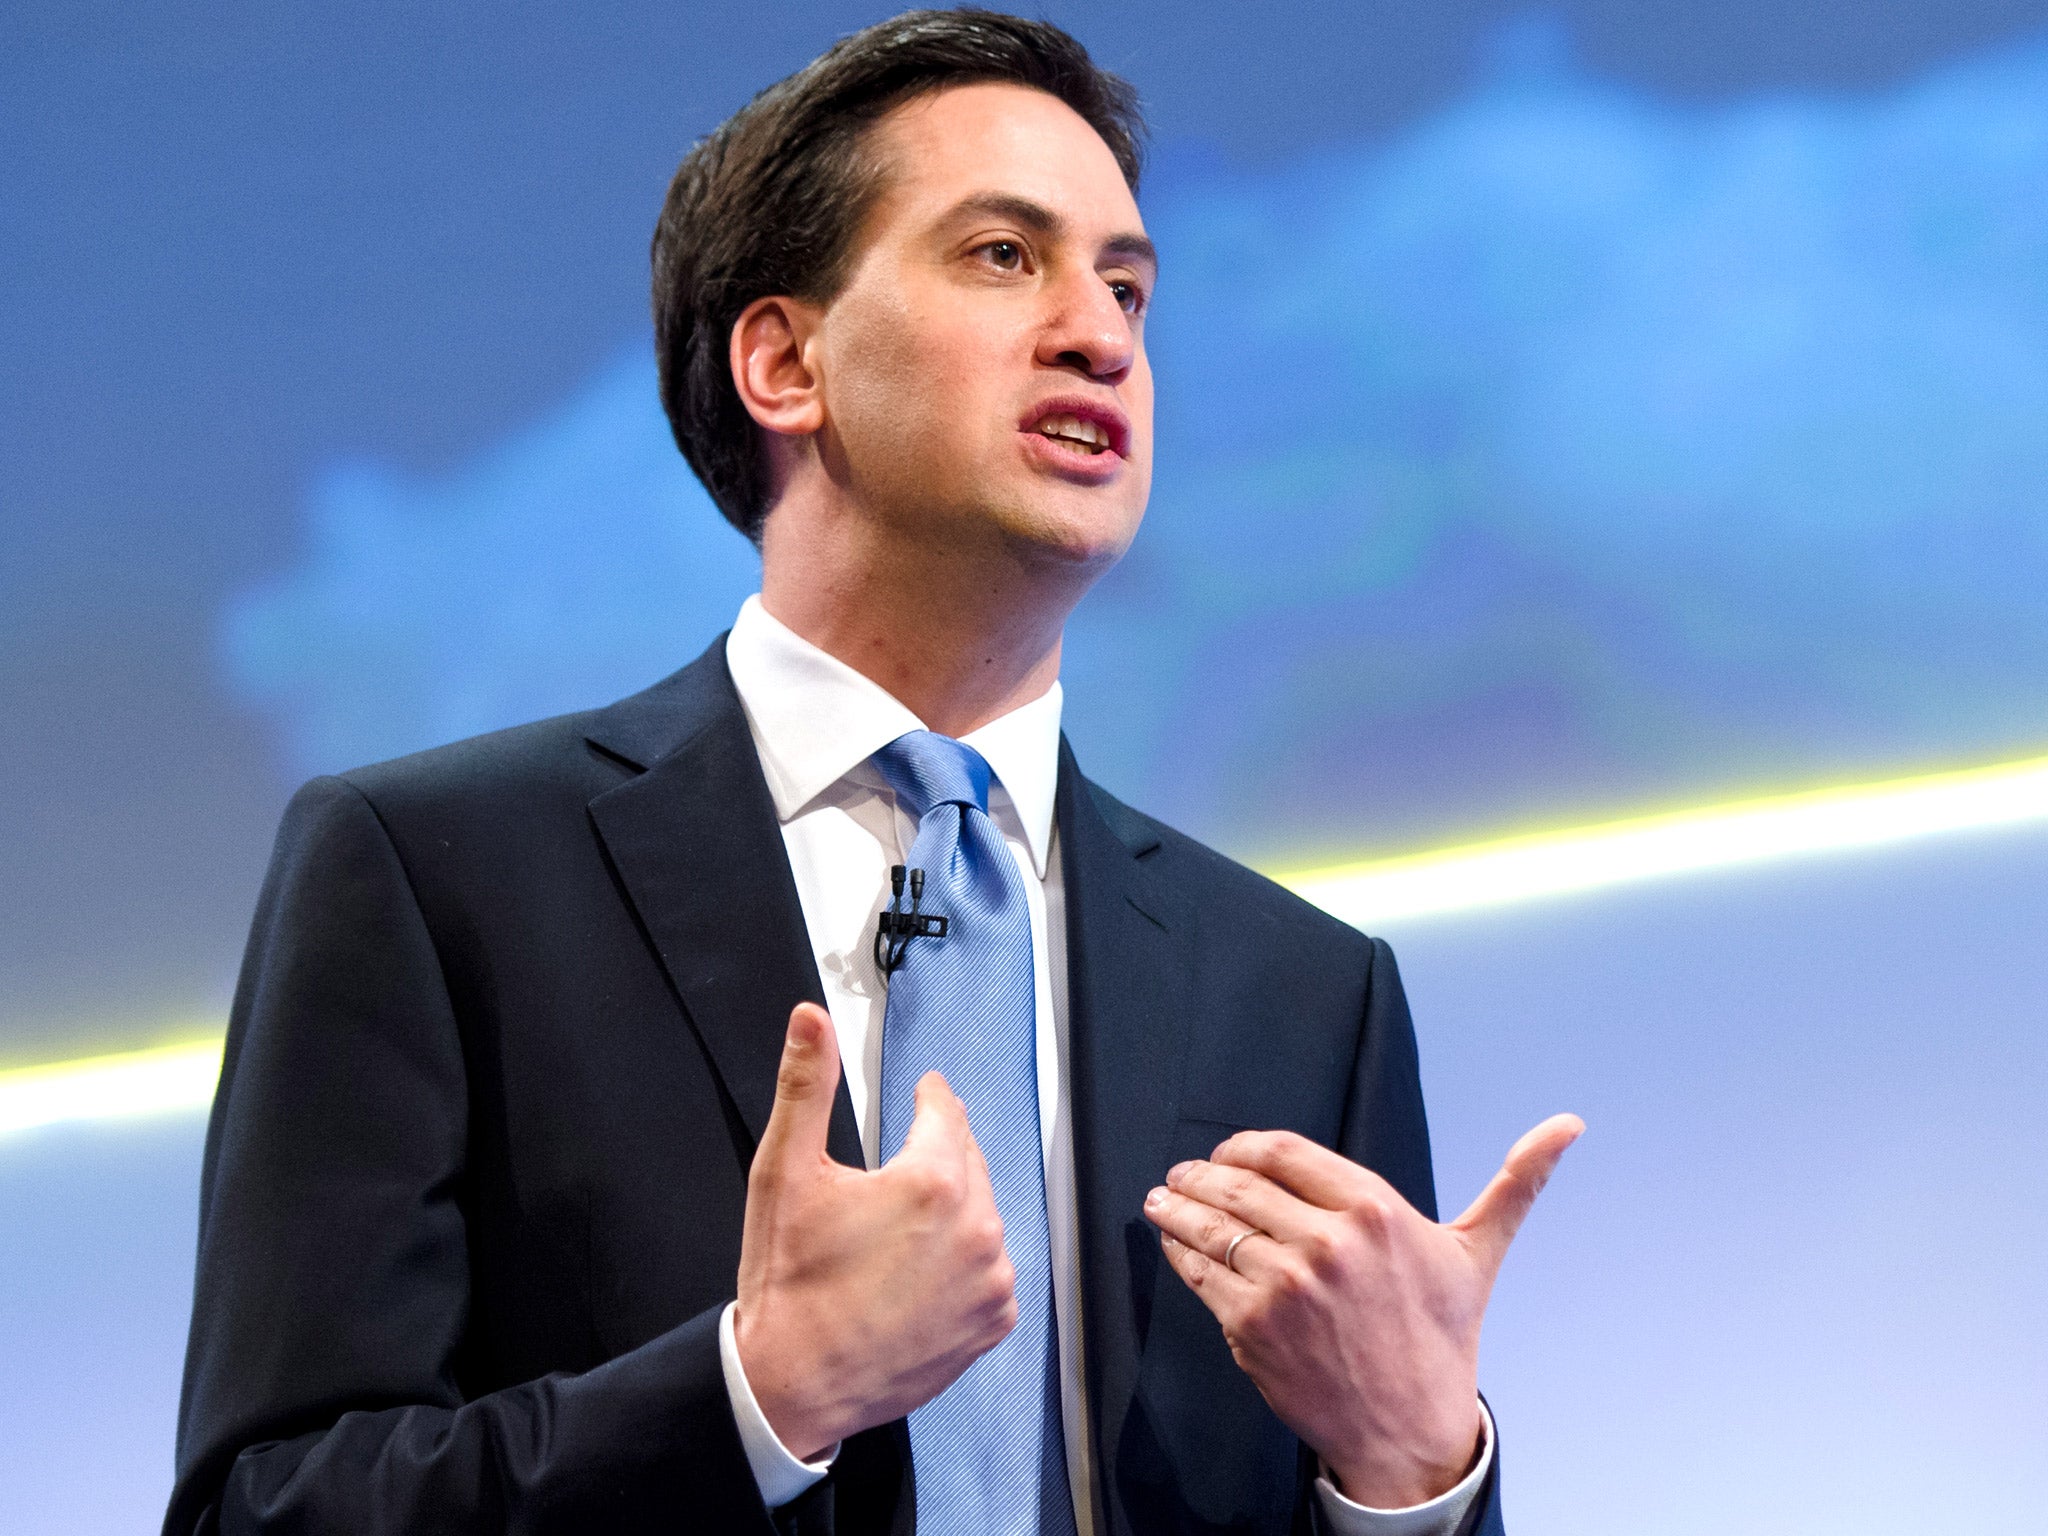 Ed Miliband: 'We need regional banks with a mission to serve that region alone'